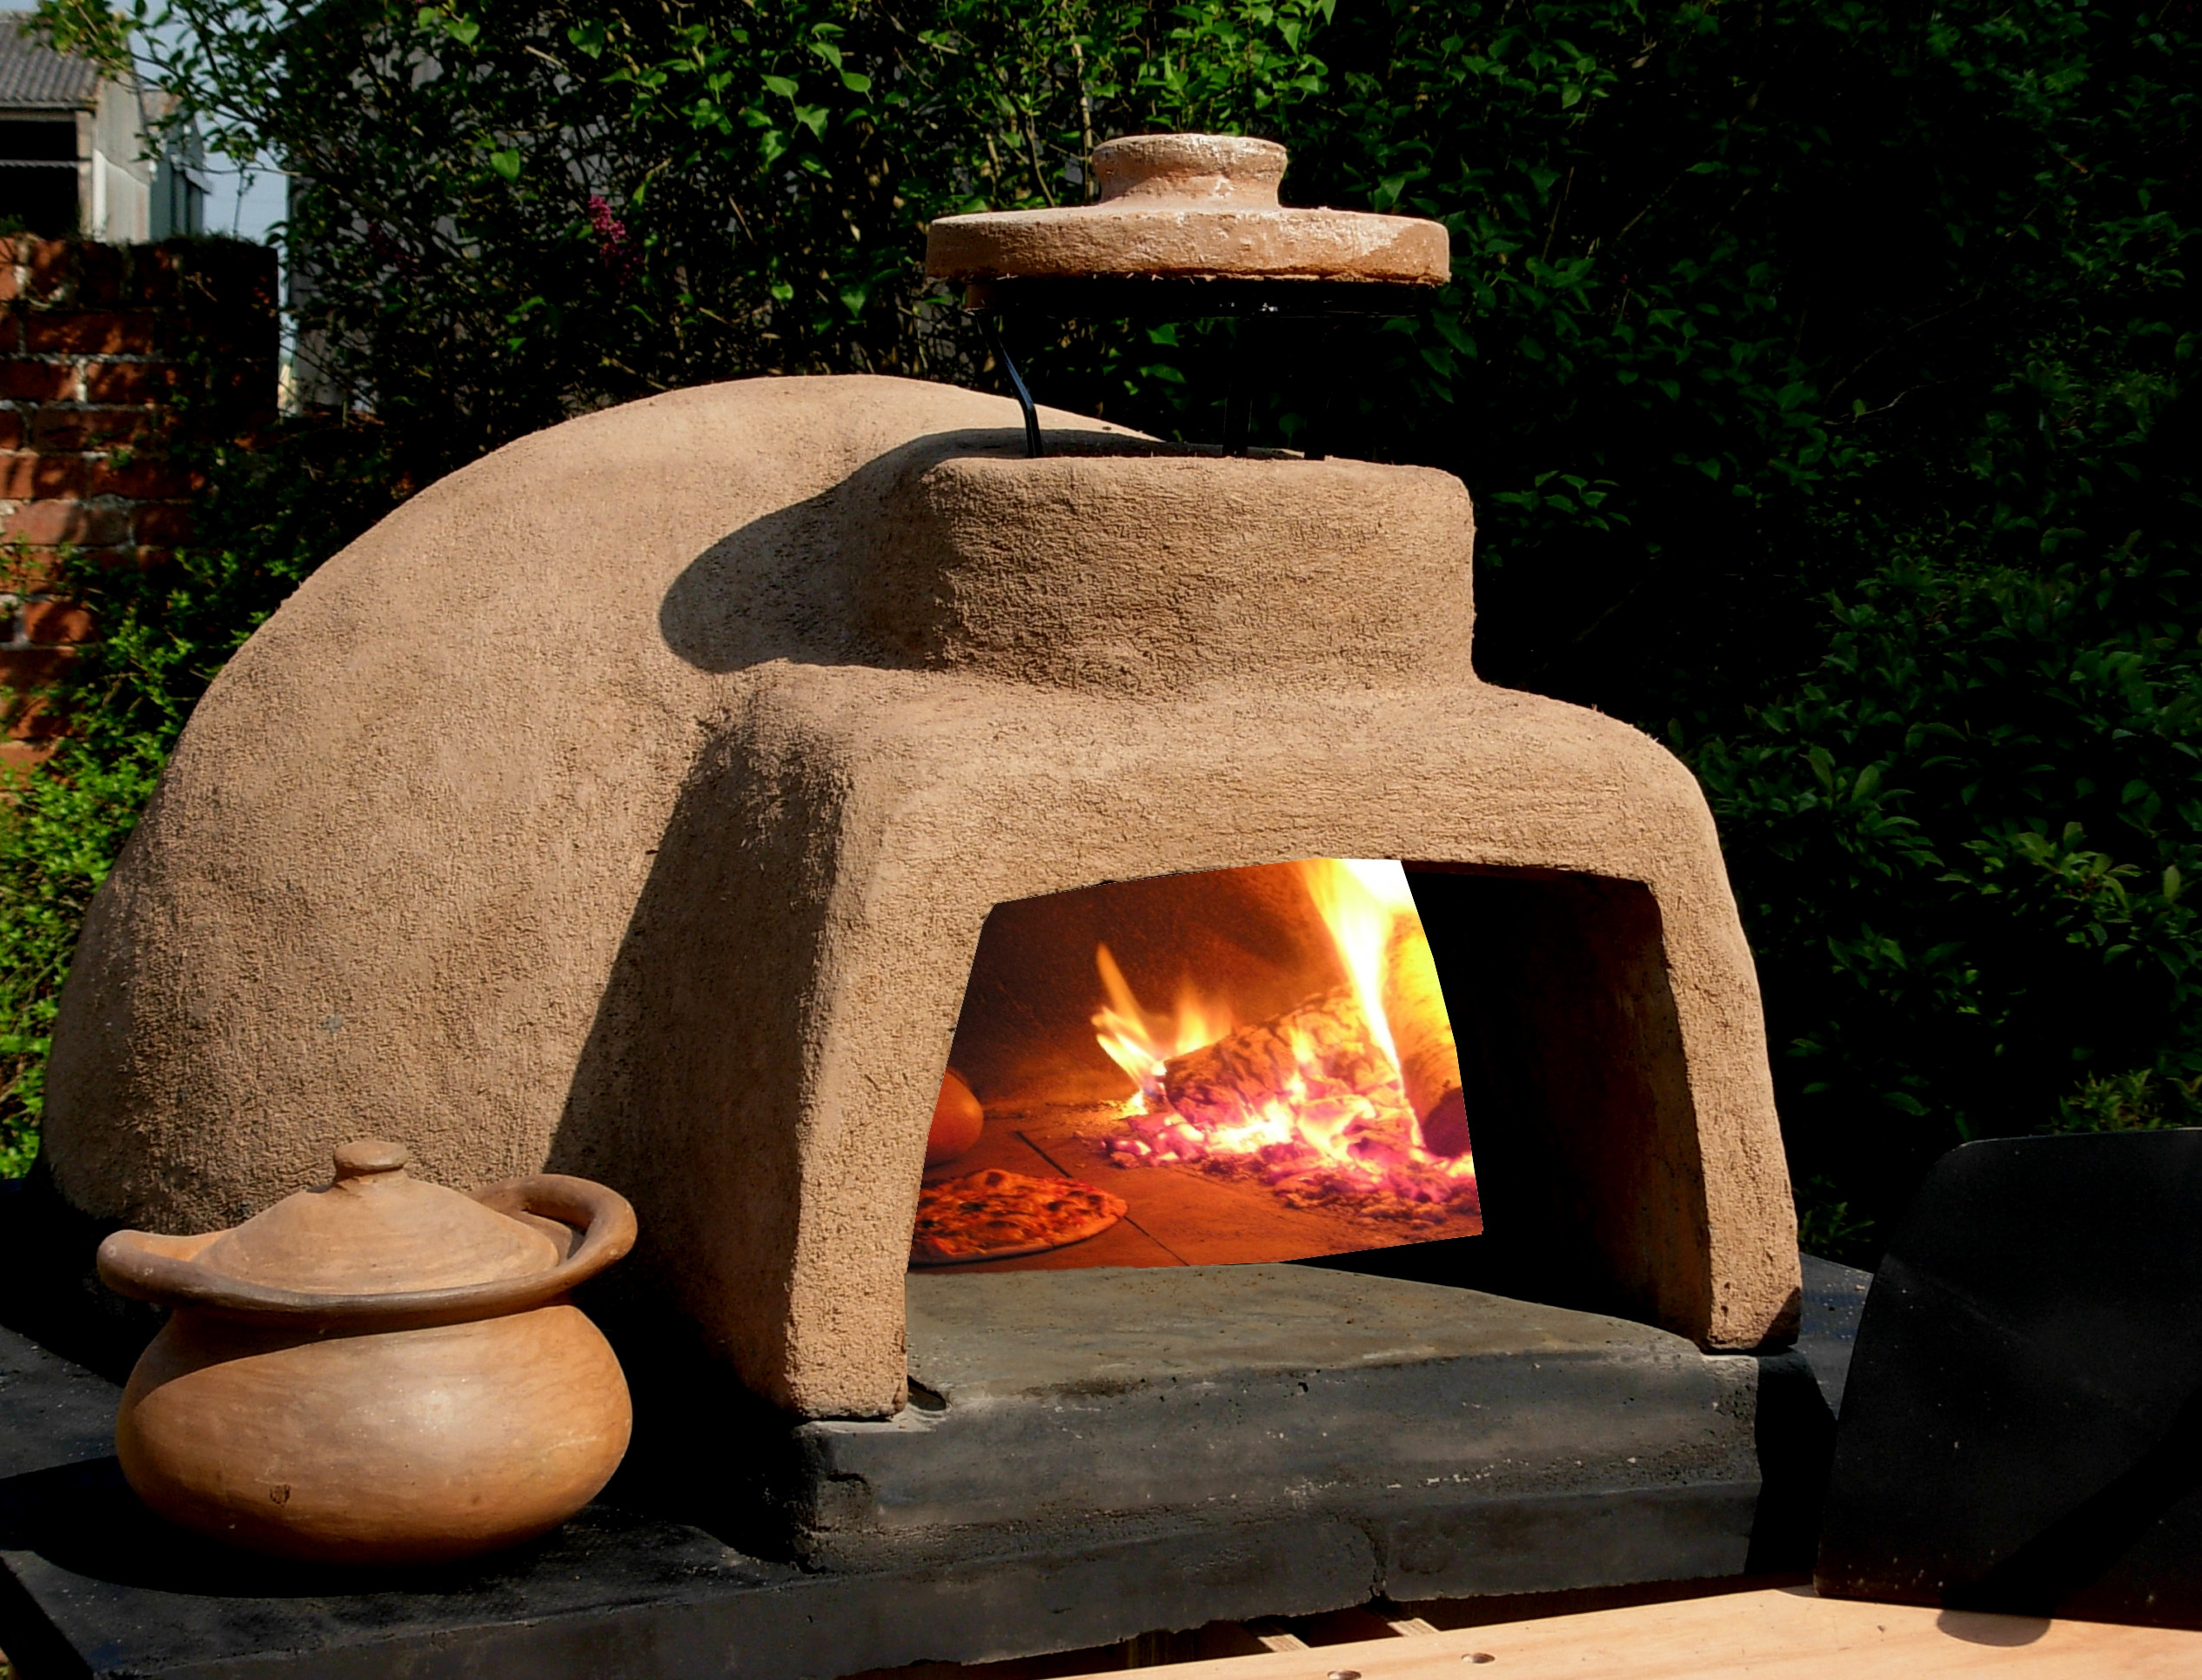 DIY Pizza Oven Plans
 15 DIY Pizza Oven Plans For Outdoors Backing – The Self